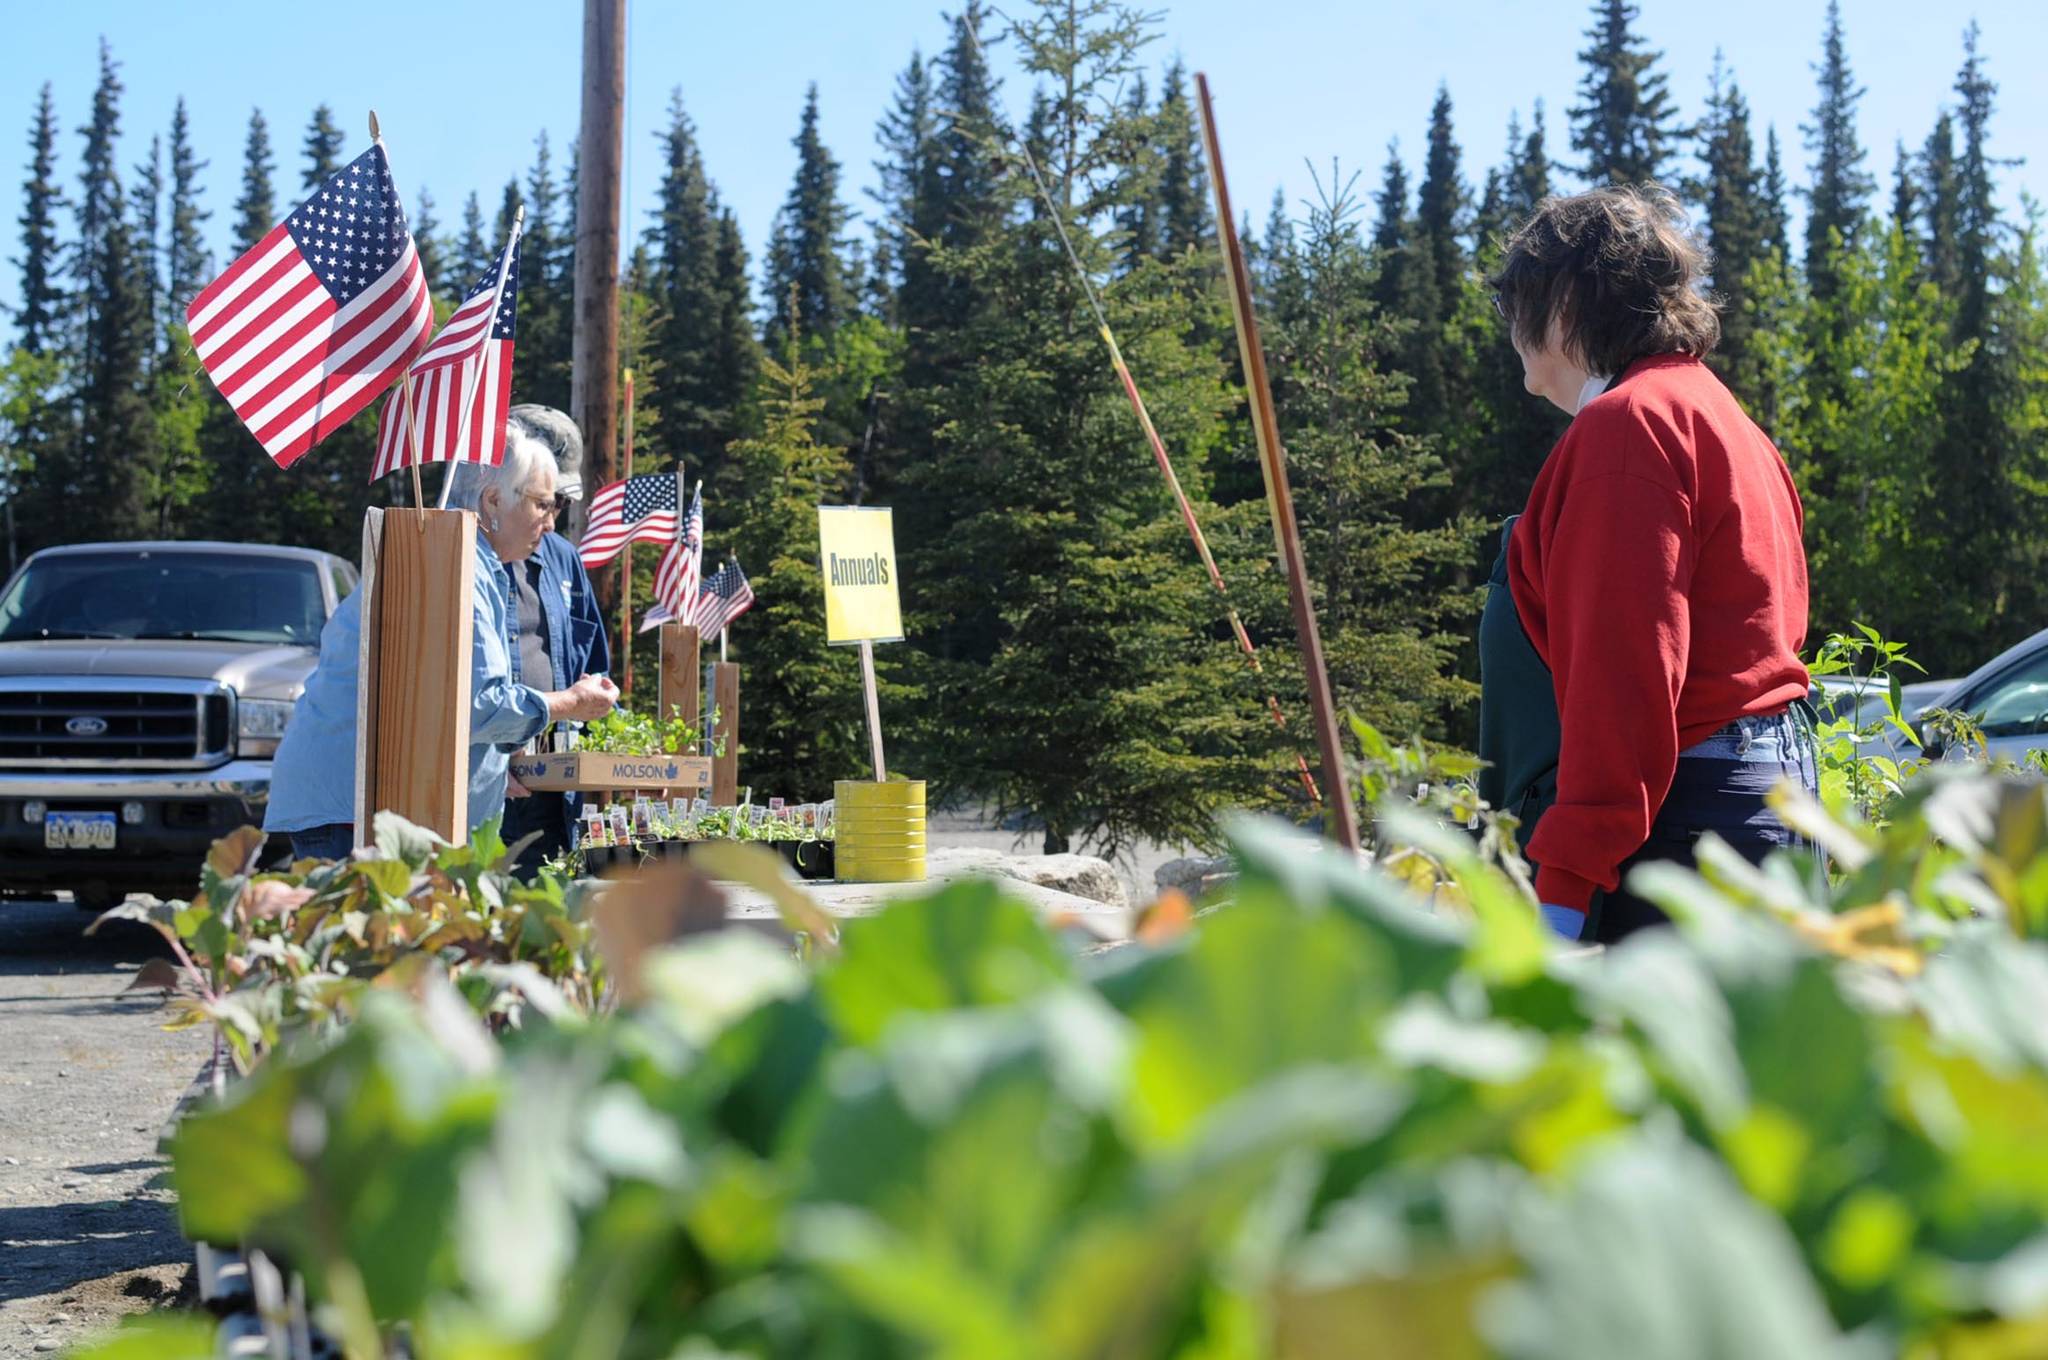 Customers pick out plants during the Central Peninsula Garden Club’s annual plant sale at Peninsula Grace Brethren Church on Kalifornsky Beach Road on Saturday, June 9, 2018 in Soldotna, Alaska. The annual plant sale is always popular — this year, volunteers said that there was a massive crowd gathered even before the sale opened at 10 a.m., nearly clearing out the tables in less than two hours. (Photo by Elizabeth Earl/Peninsula Clarion)